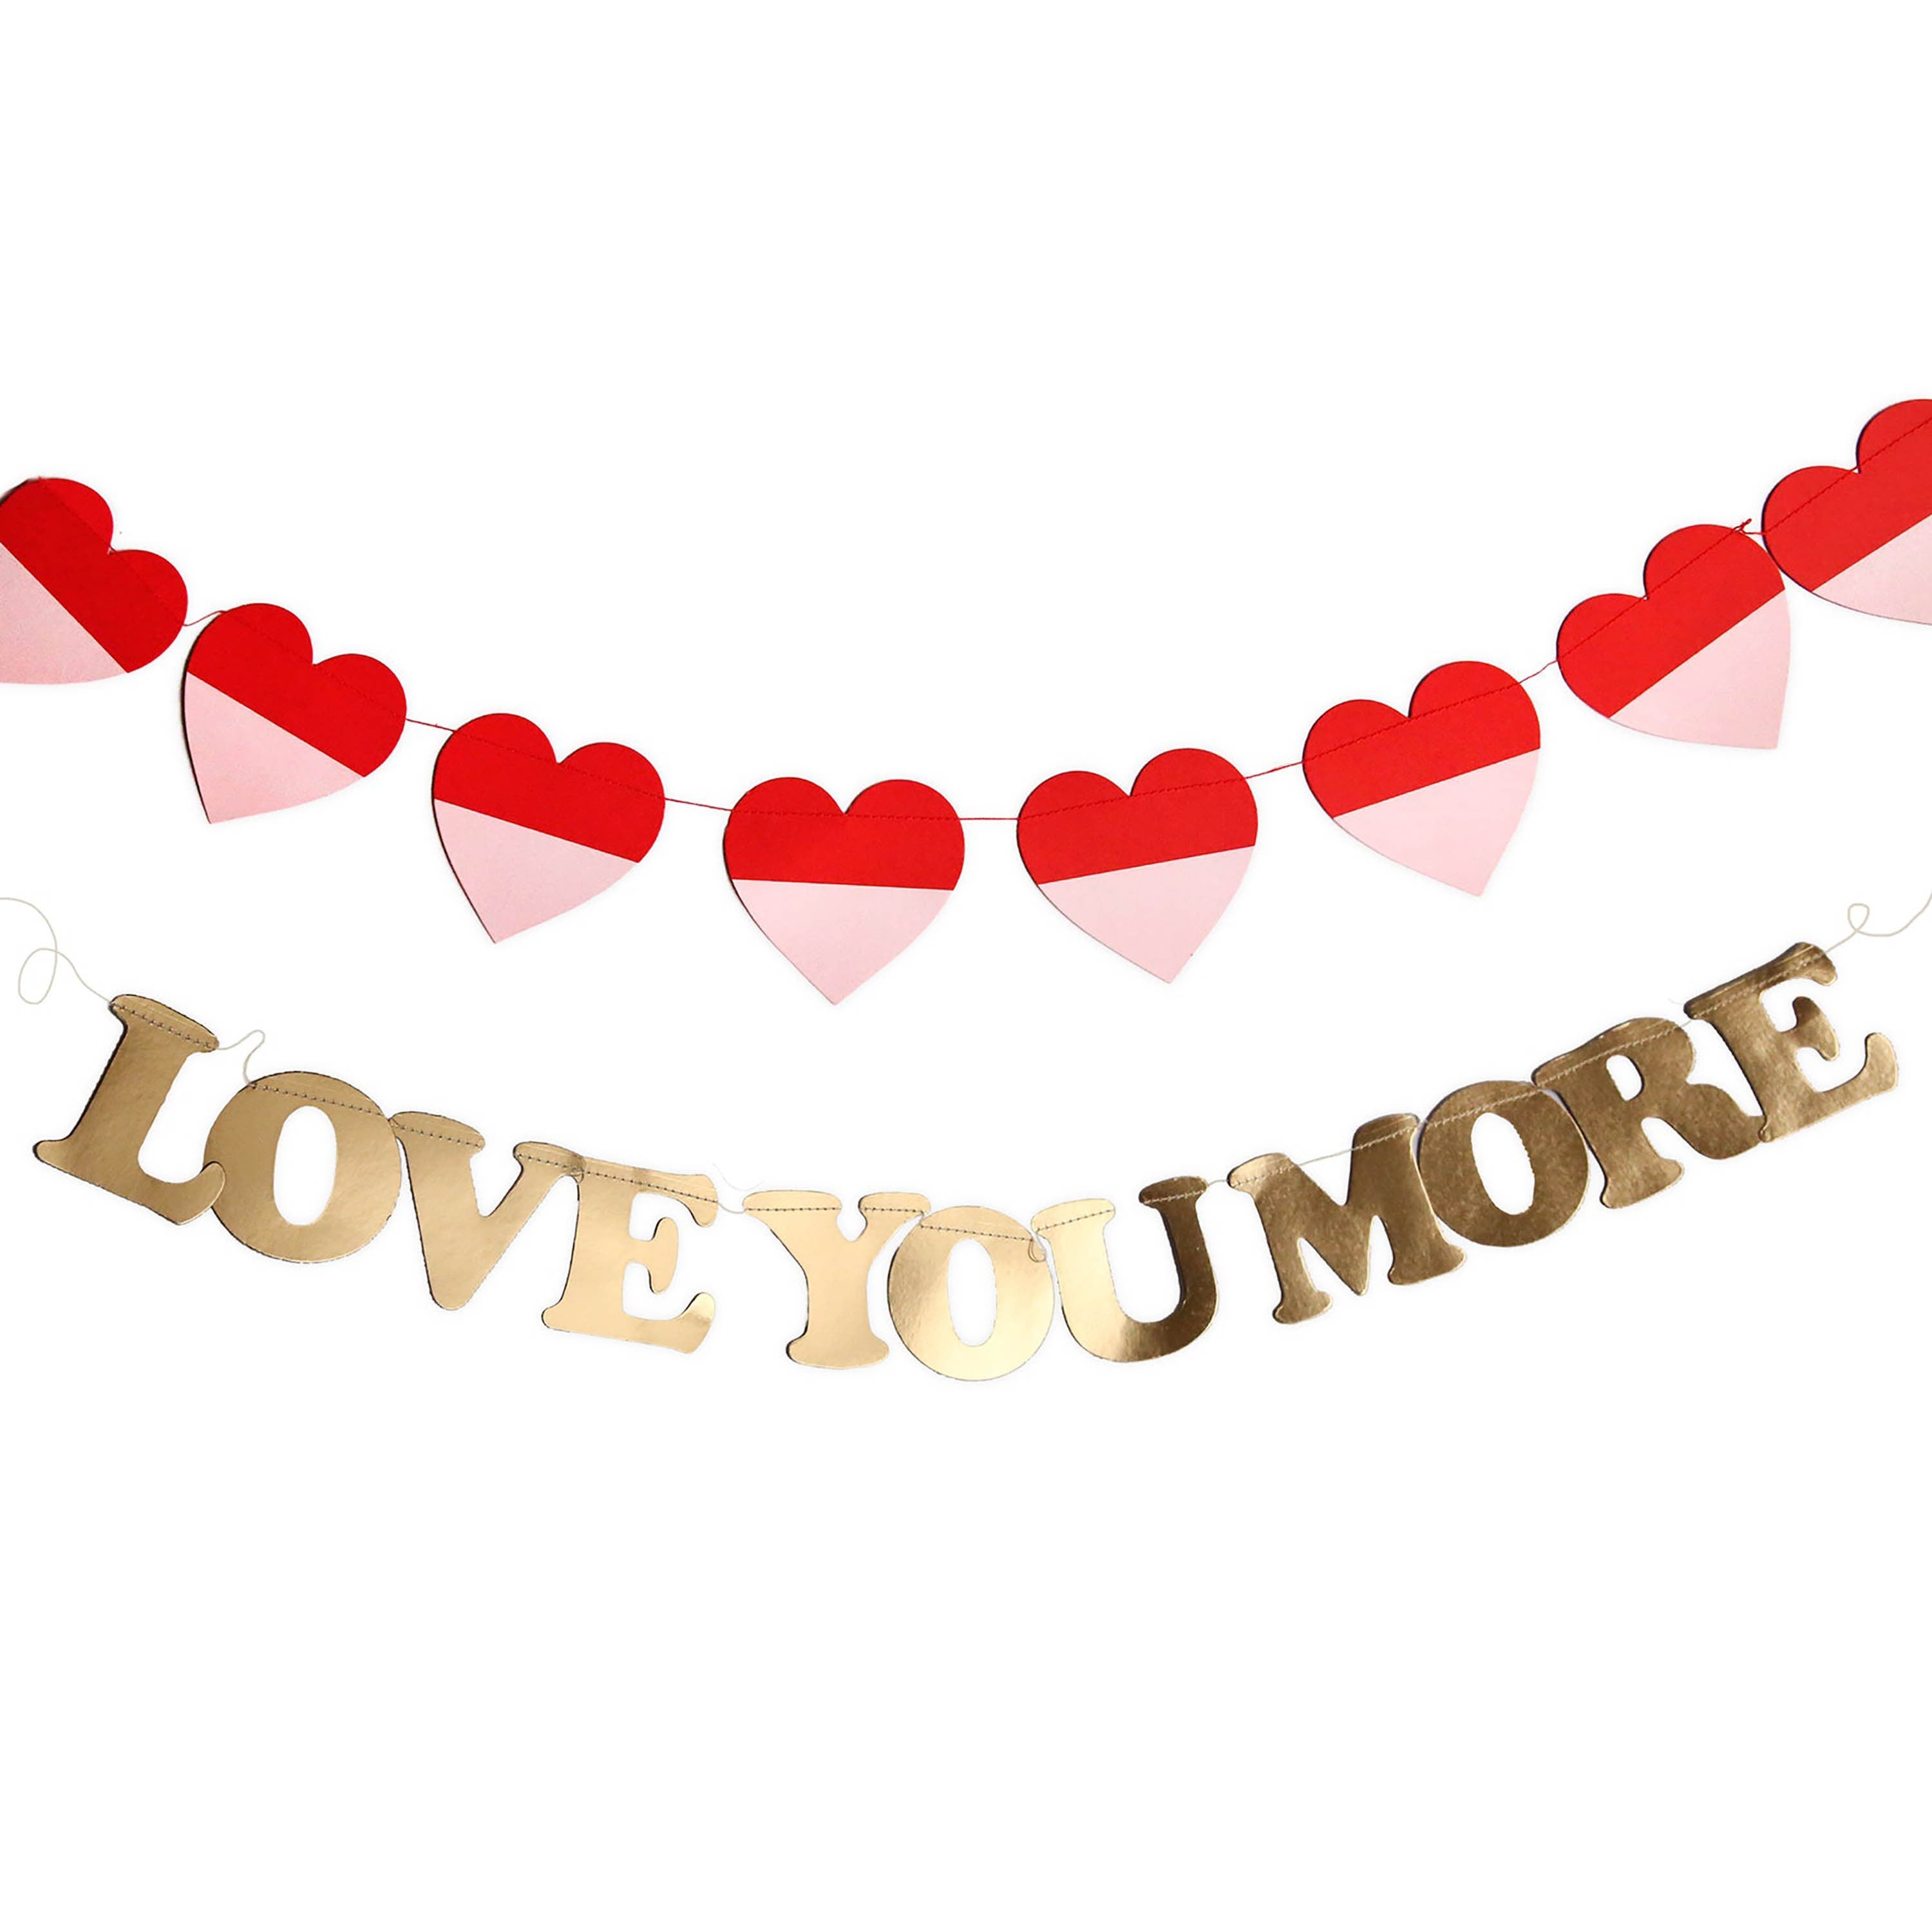 Love You More & Heart Banner | Valentine's Day Banner - Valentine's Day Decoration - Valentine's Day Party - Love Banner - Heart Party Decor